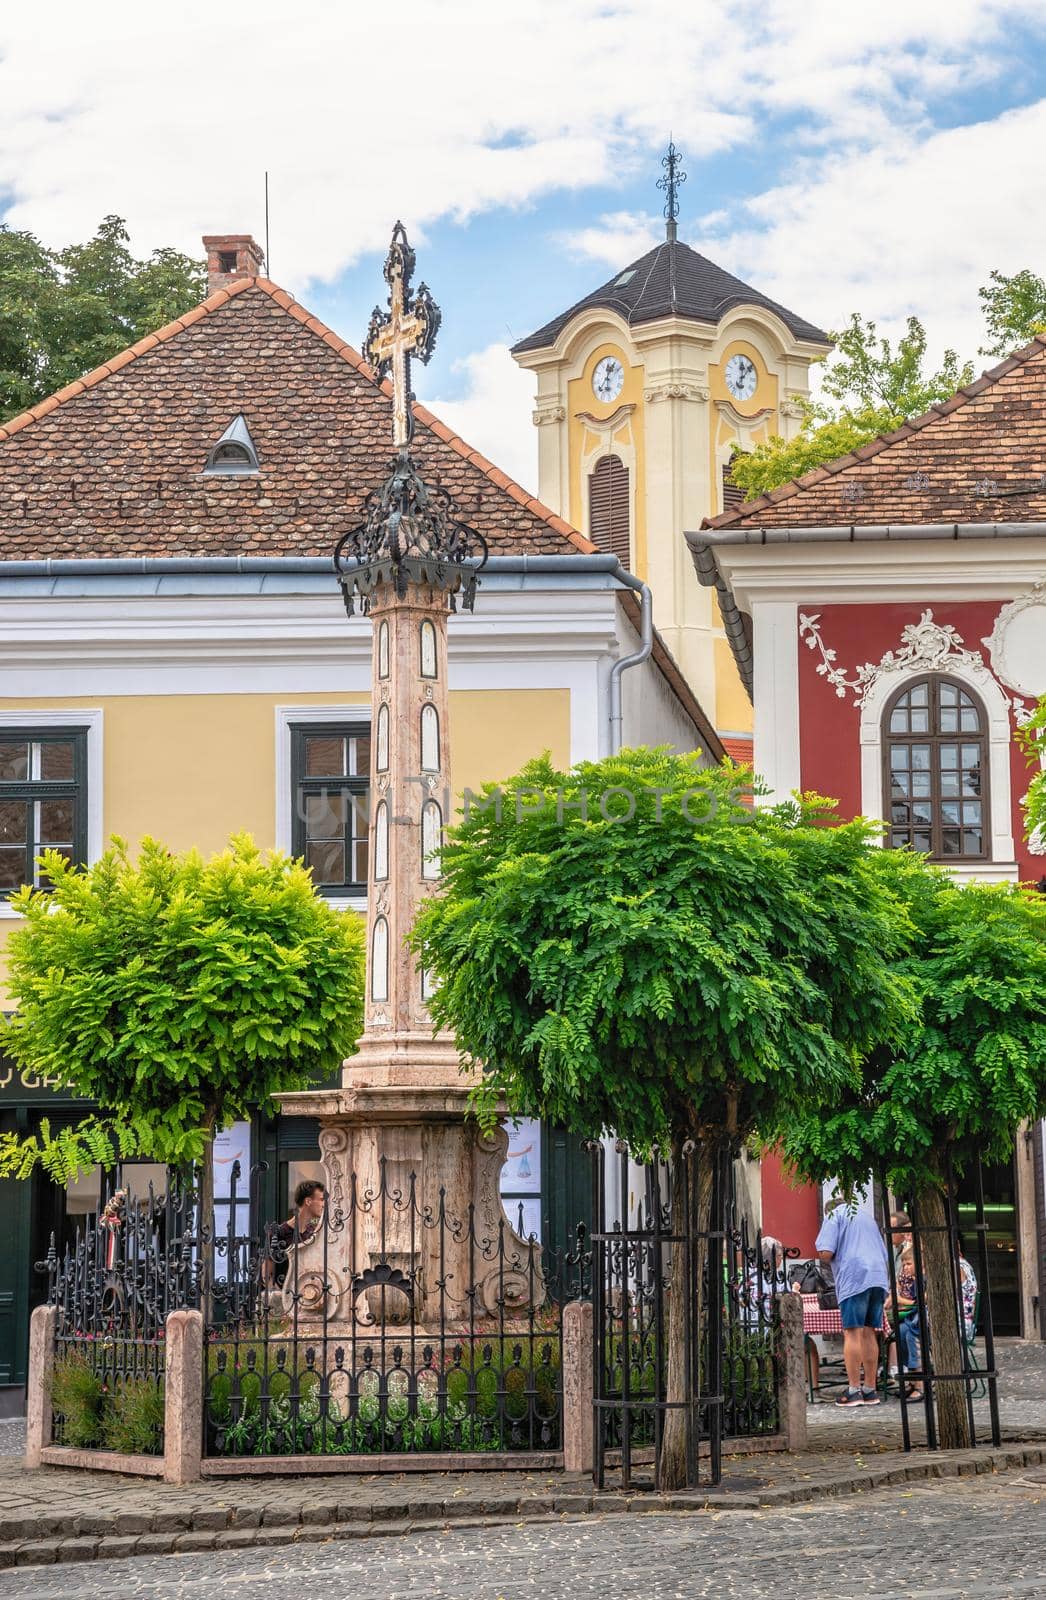 Streets of the old town of Szentendre, Hungary by Multipedia